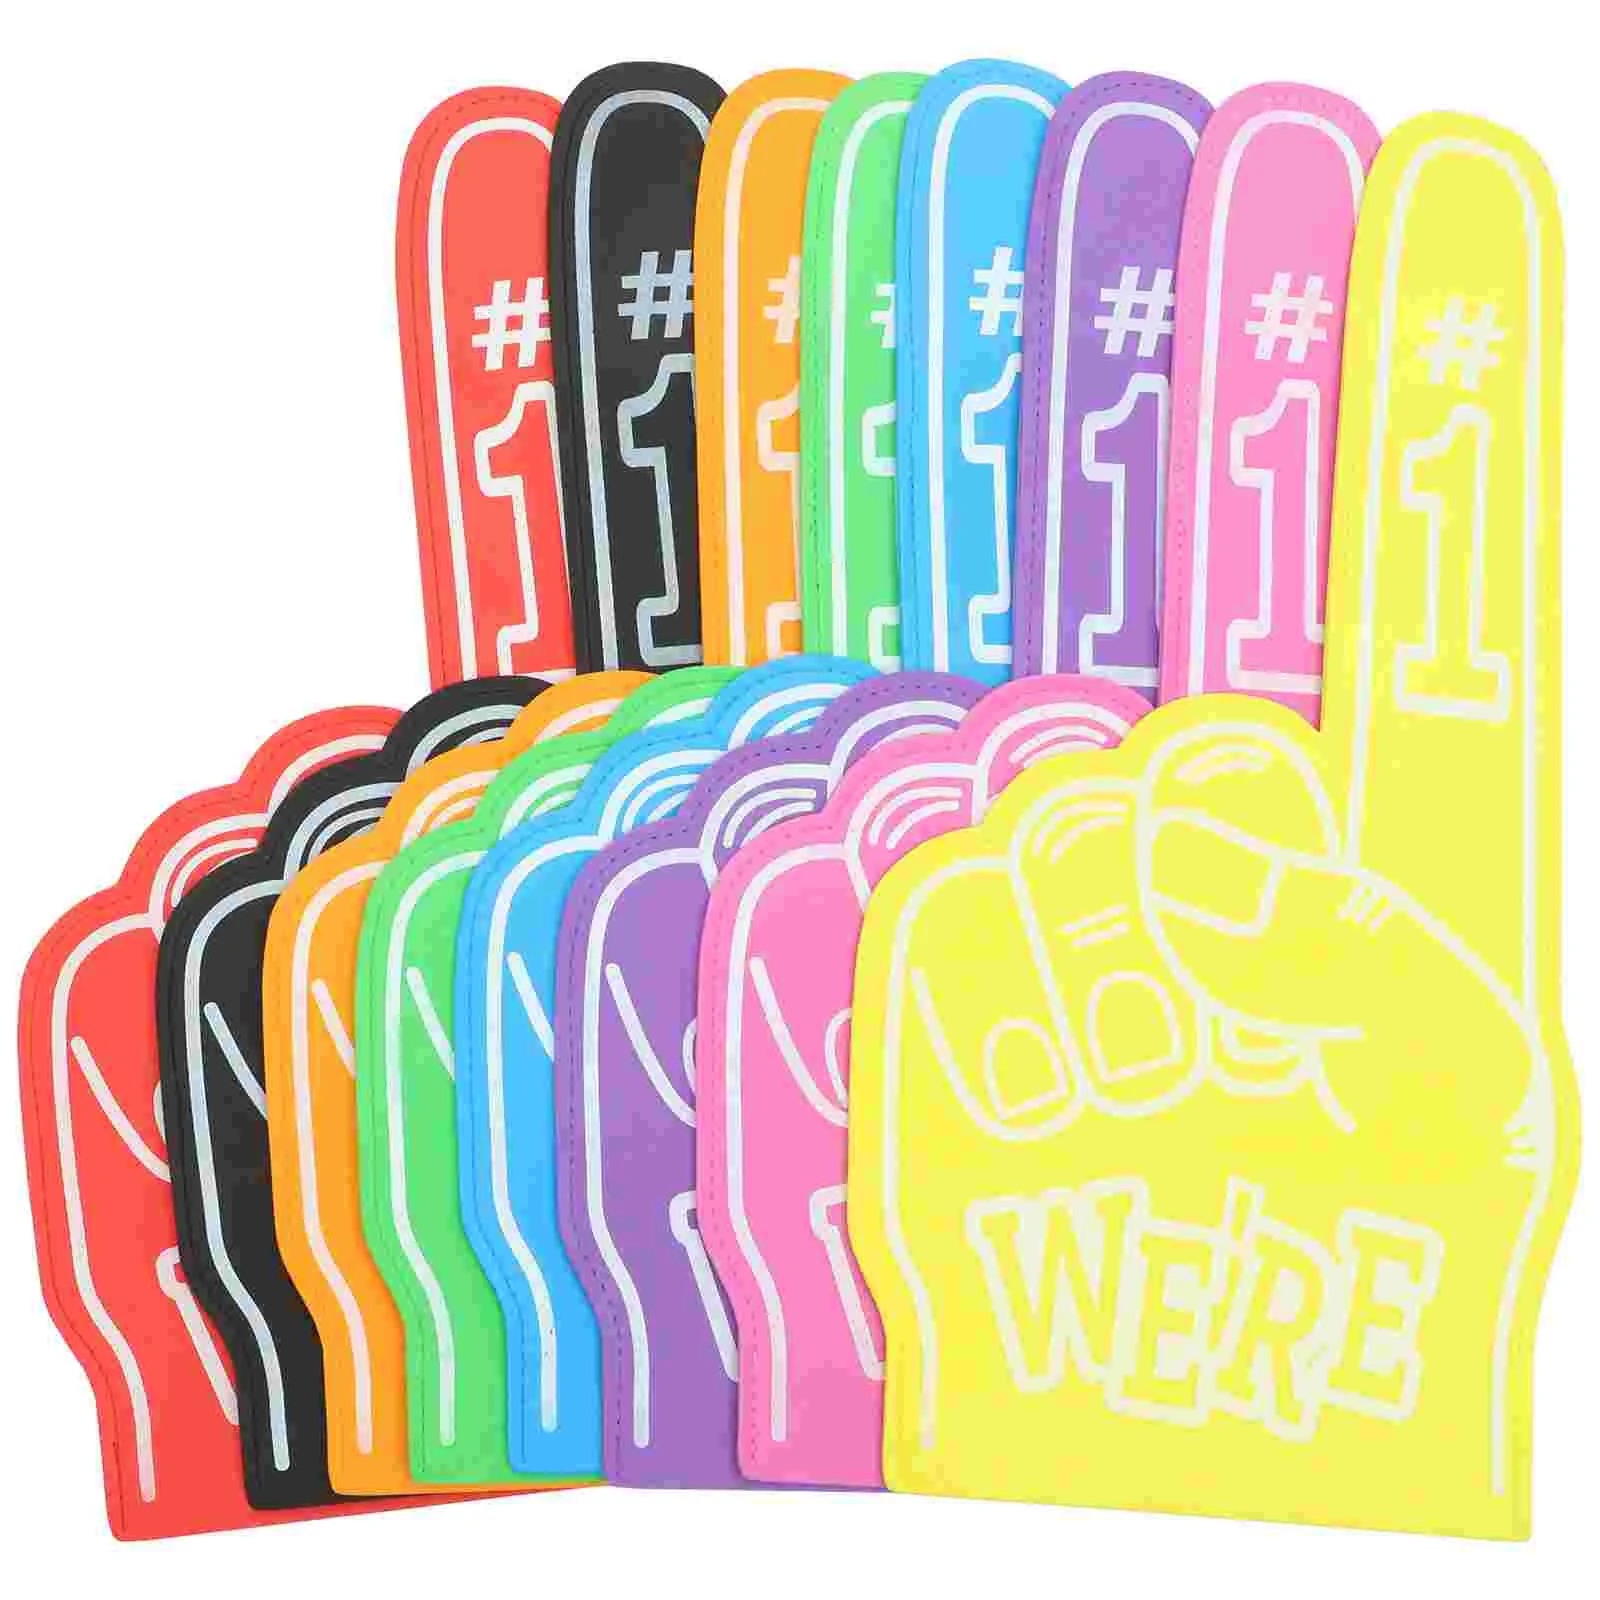 

8 Pcs Foam Finger Cots Cheerleader Clap Hands Toy Noise Makers Party Favors Giant Football Game Eva Child Fingers for Sports